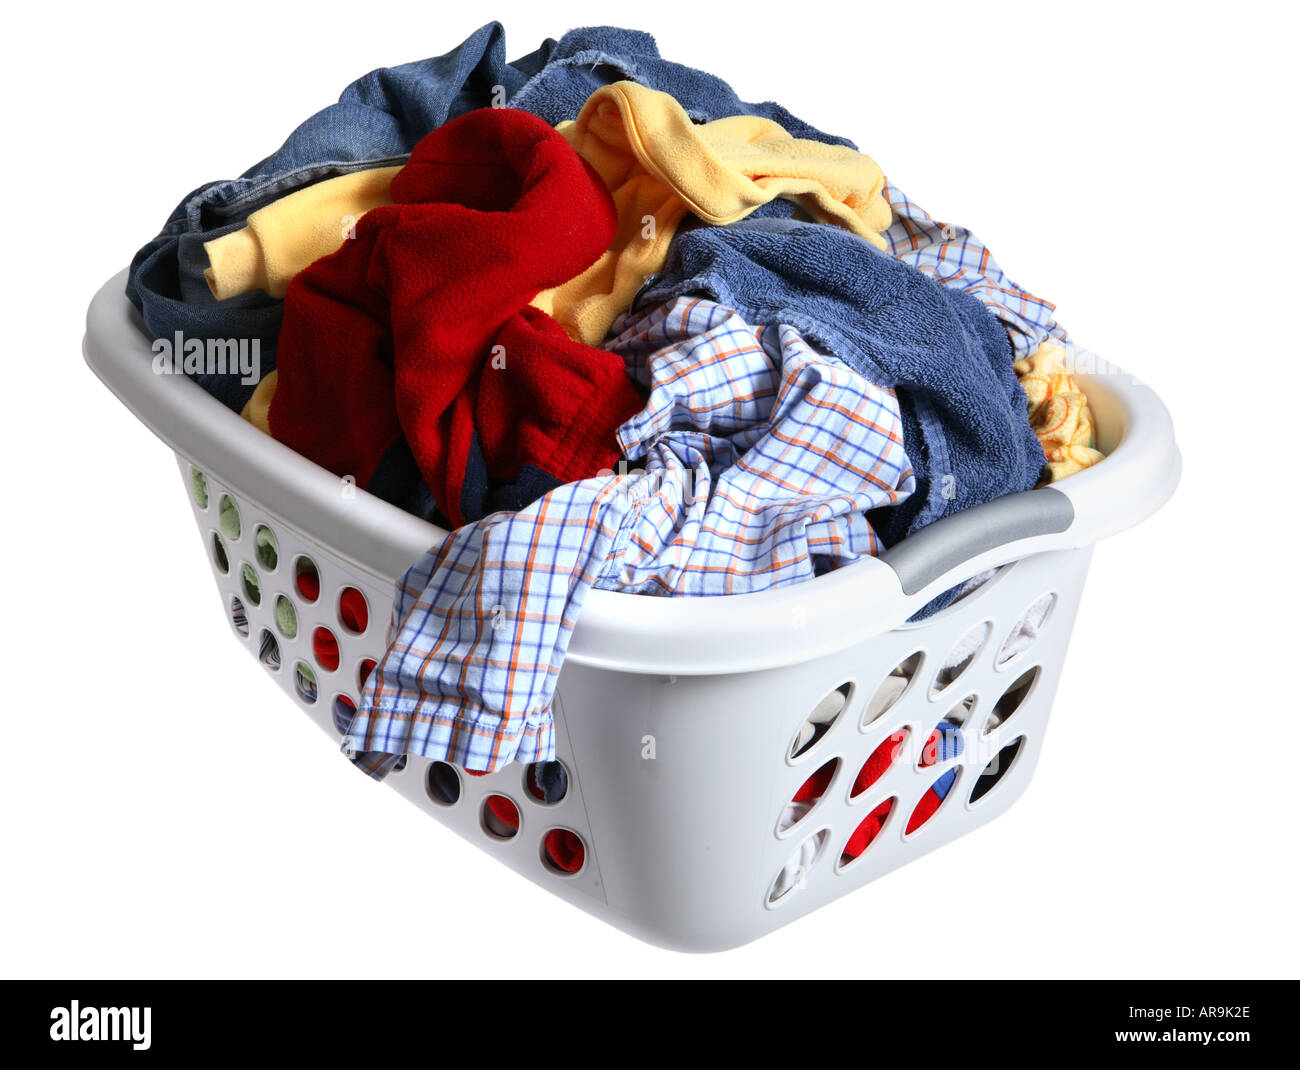 Laundry basket full of dirty clothes Stock Photo - Alamy